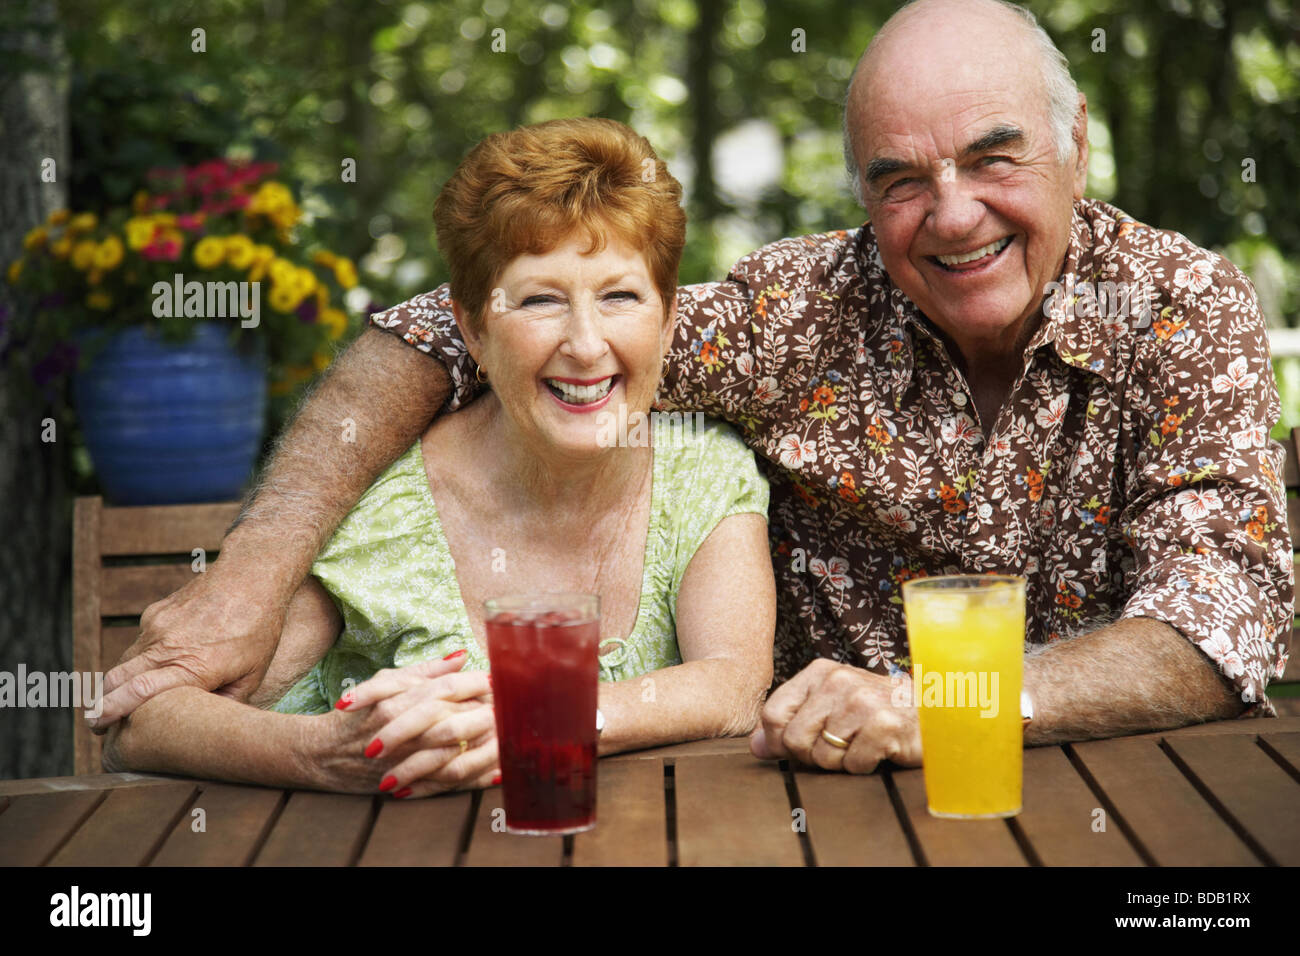 Portrait of a senior couple sitting at a table and smiling Stock Photo